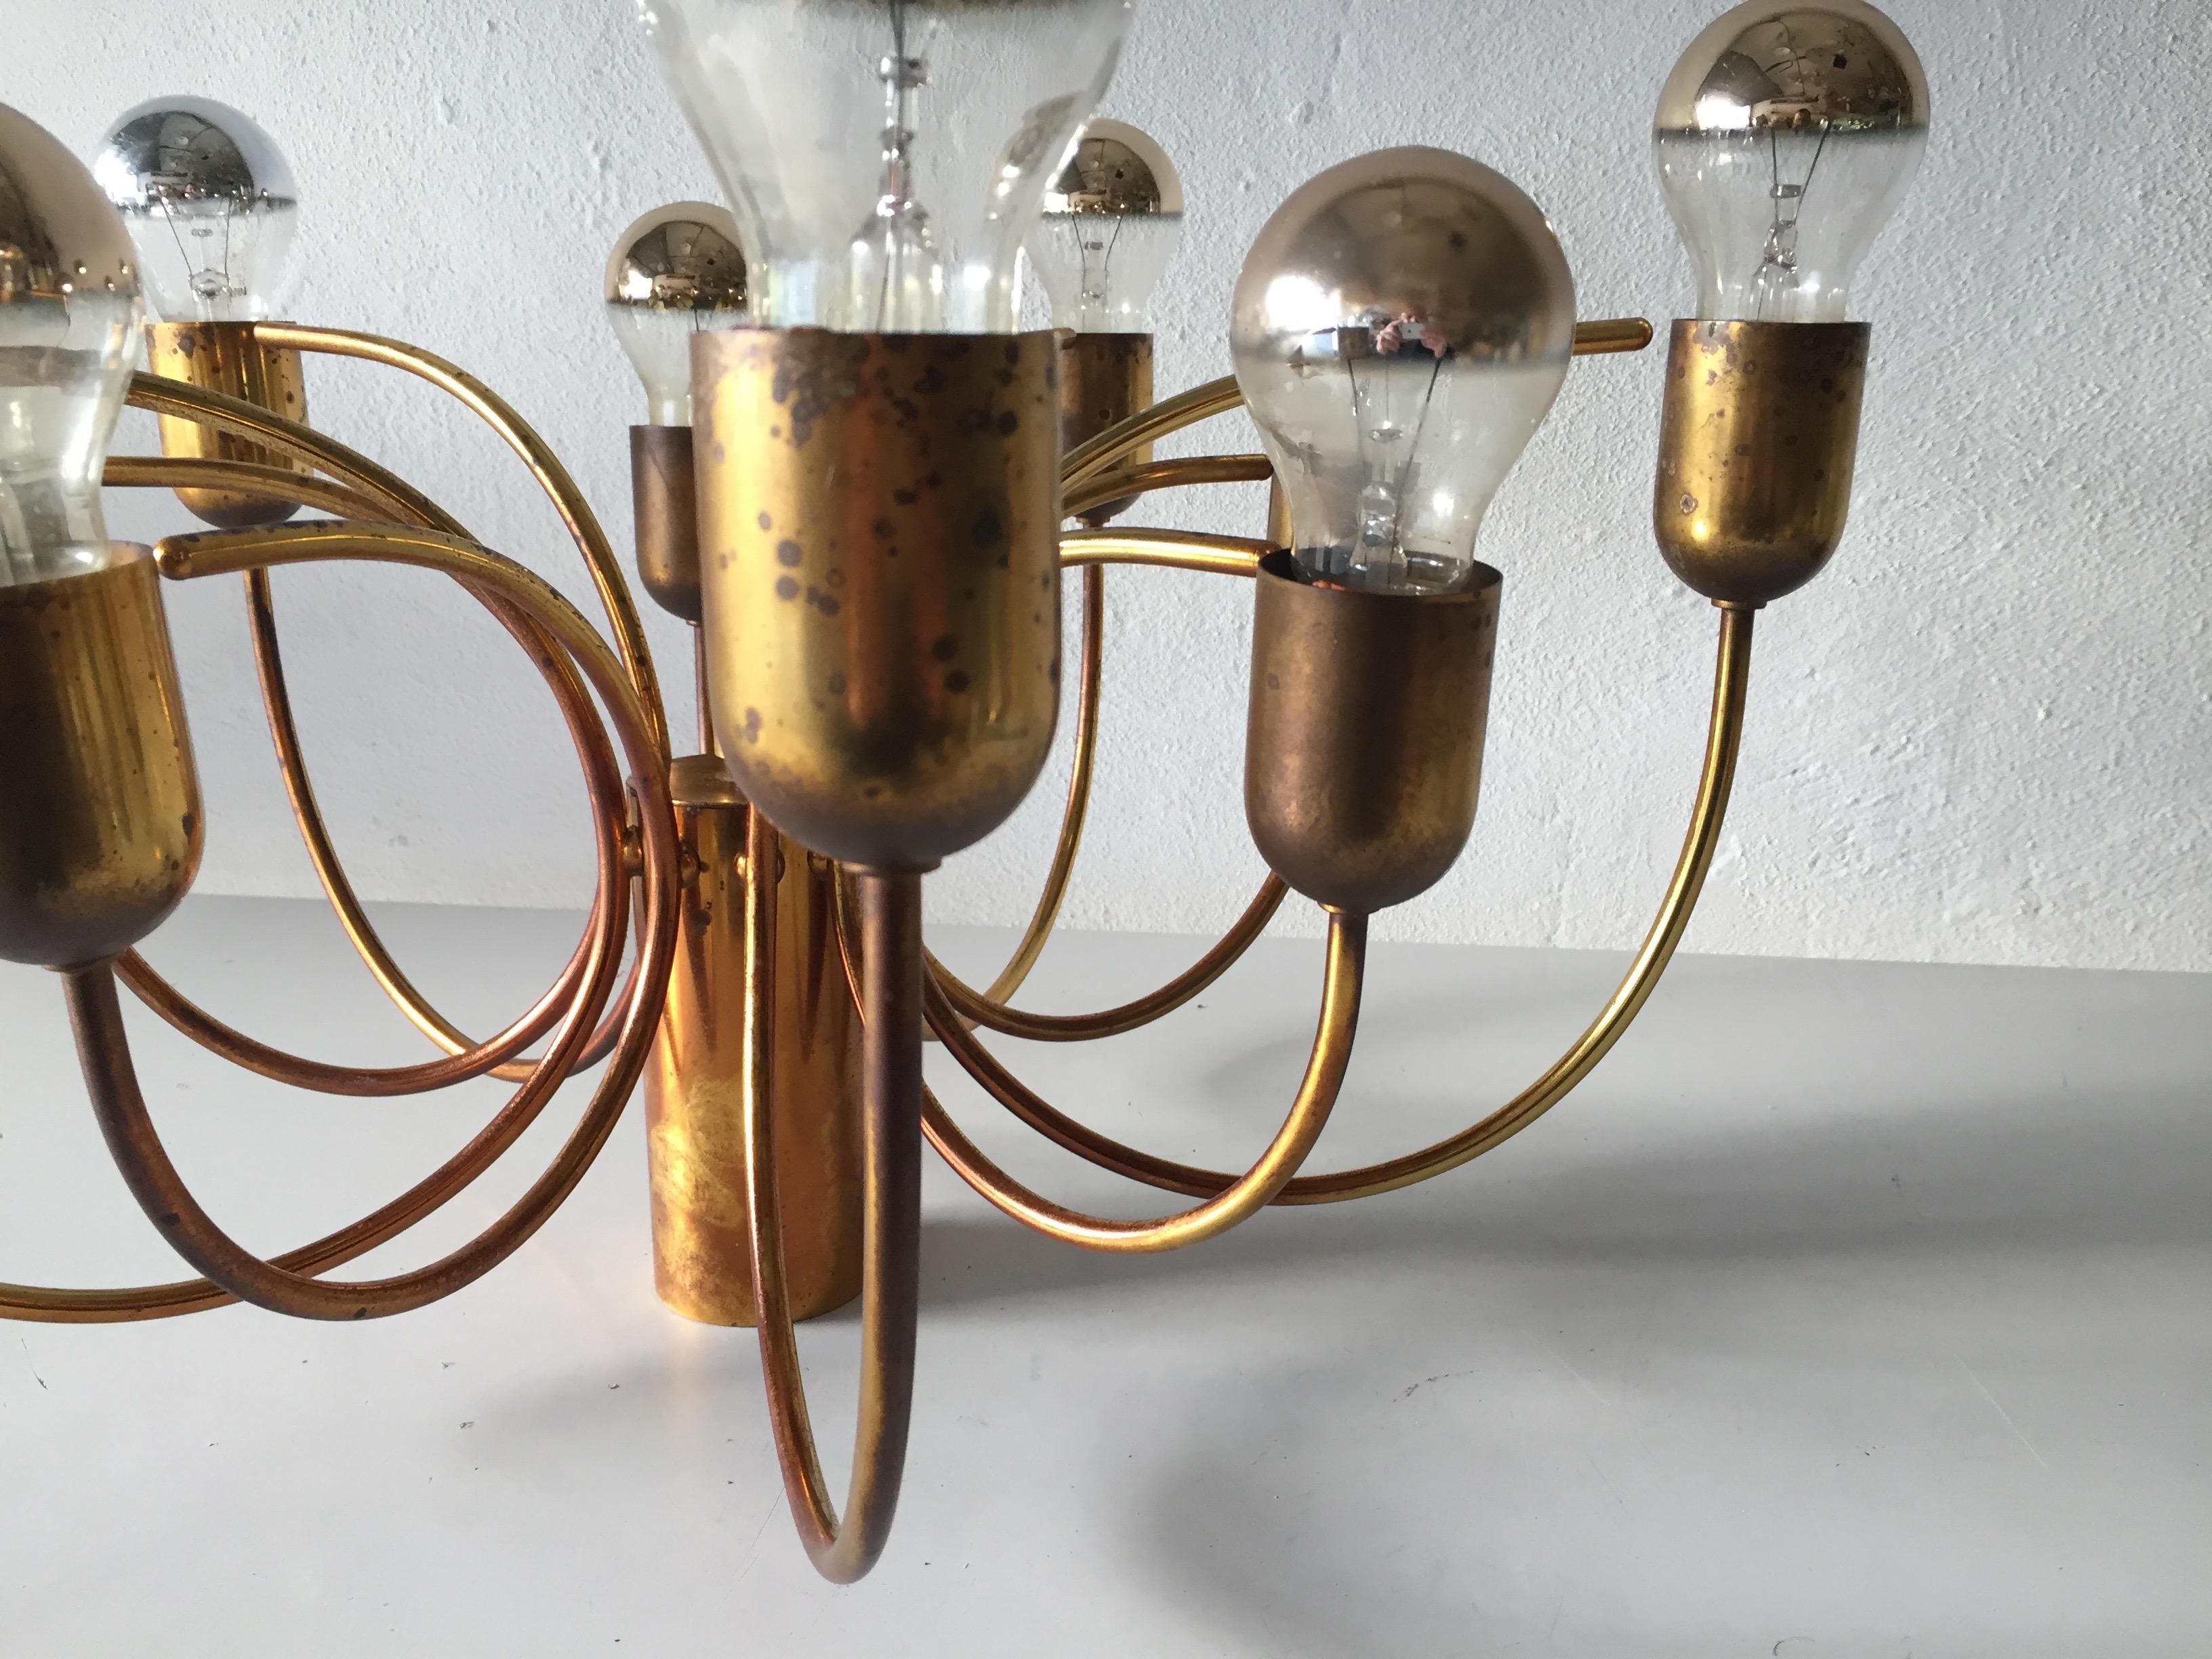 Late 20th Century Rare 10 Arc Shaped Arms Full Brass Chandelier by Cosack Leuchten, 1970s Germany For Sale